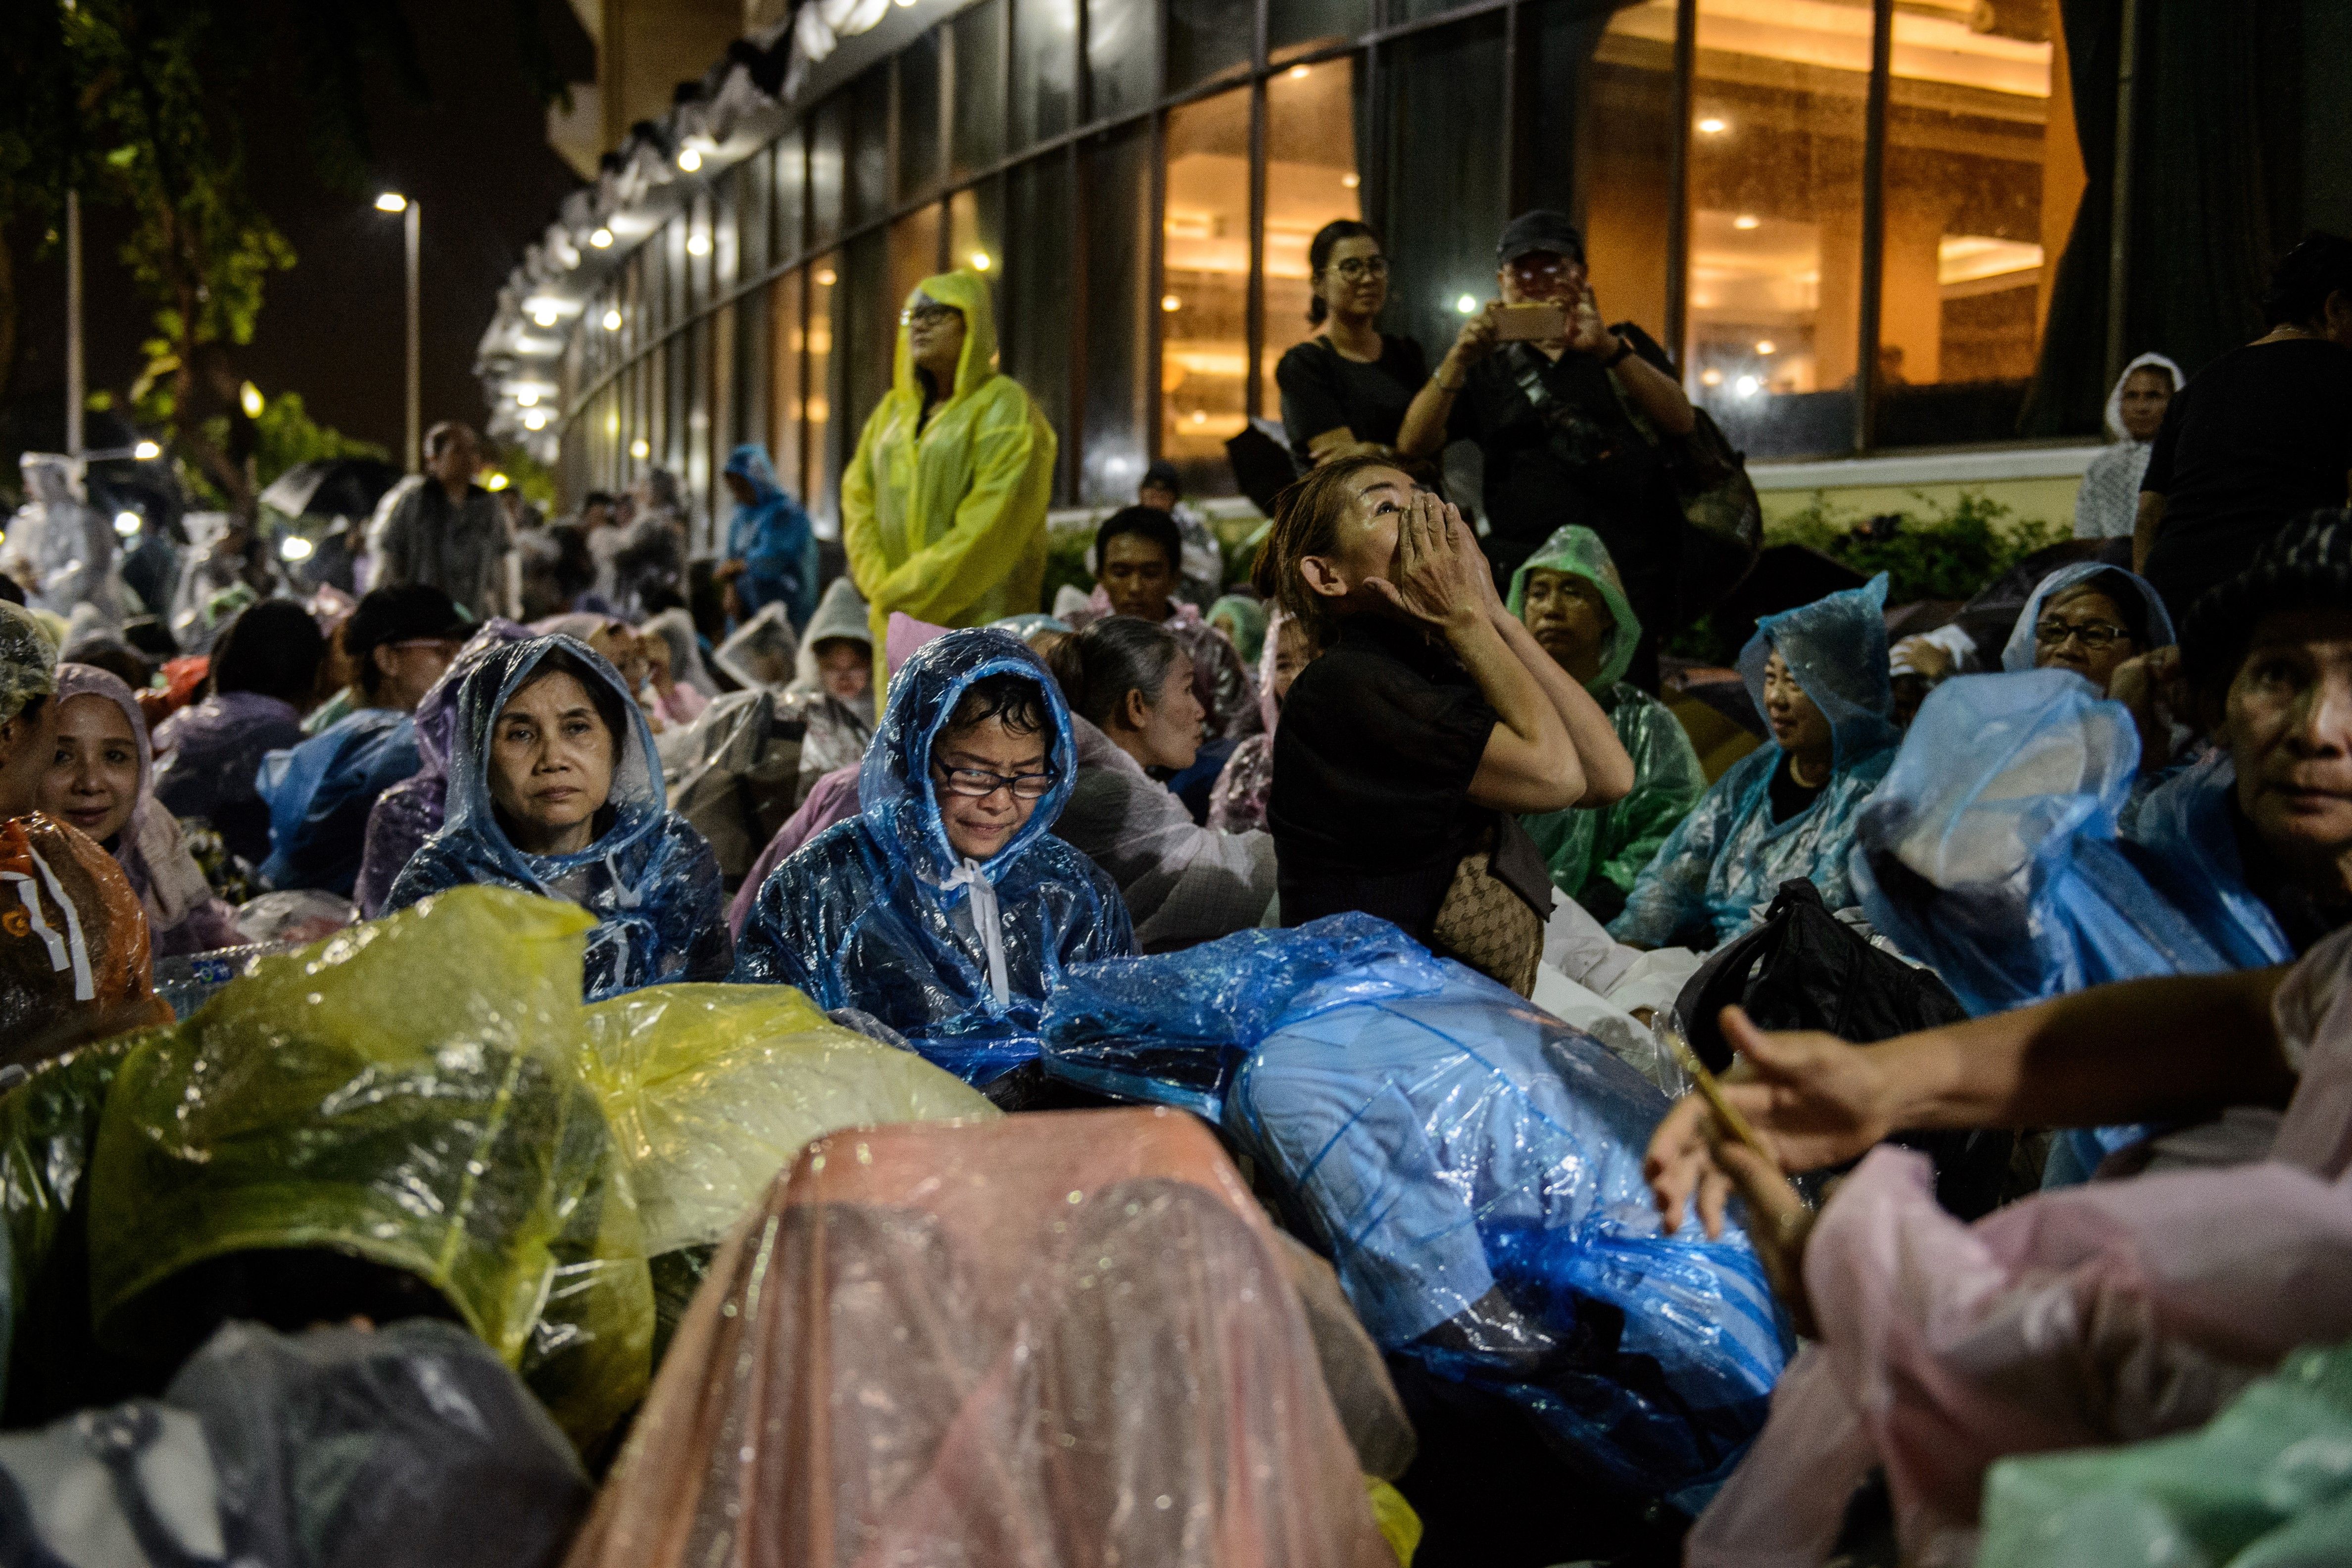 Mourners shelter from the rain while waiting for the funeral of the late Thai King Bhumibol Adulyadej in Bangkok on Oct. 24, 2017. (Anthony Wallace—AFP/Getty Images)